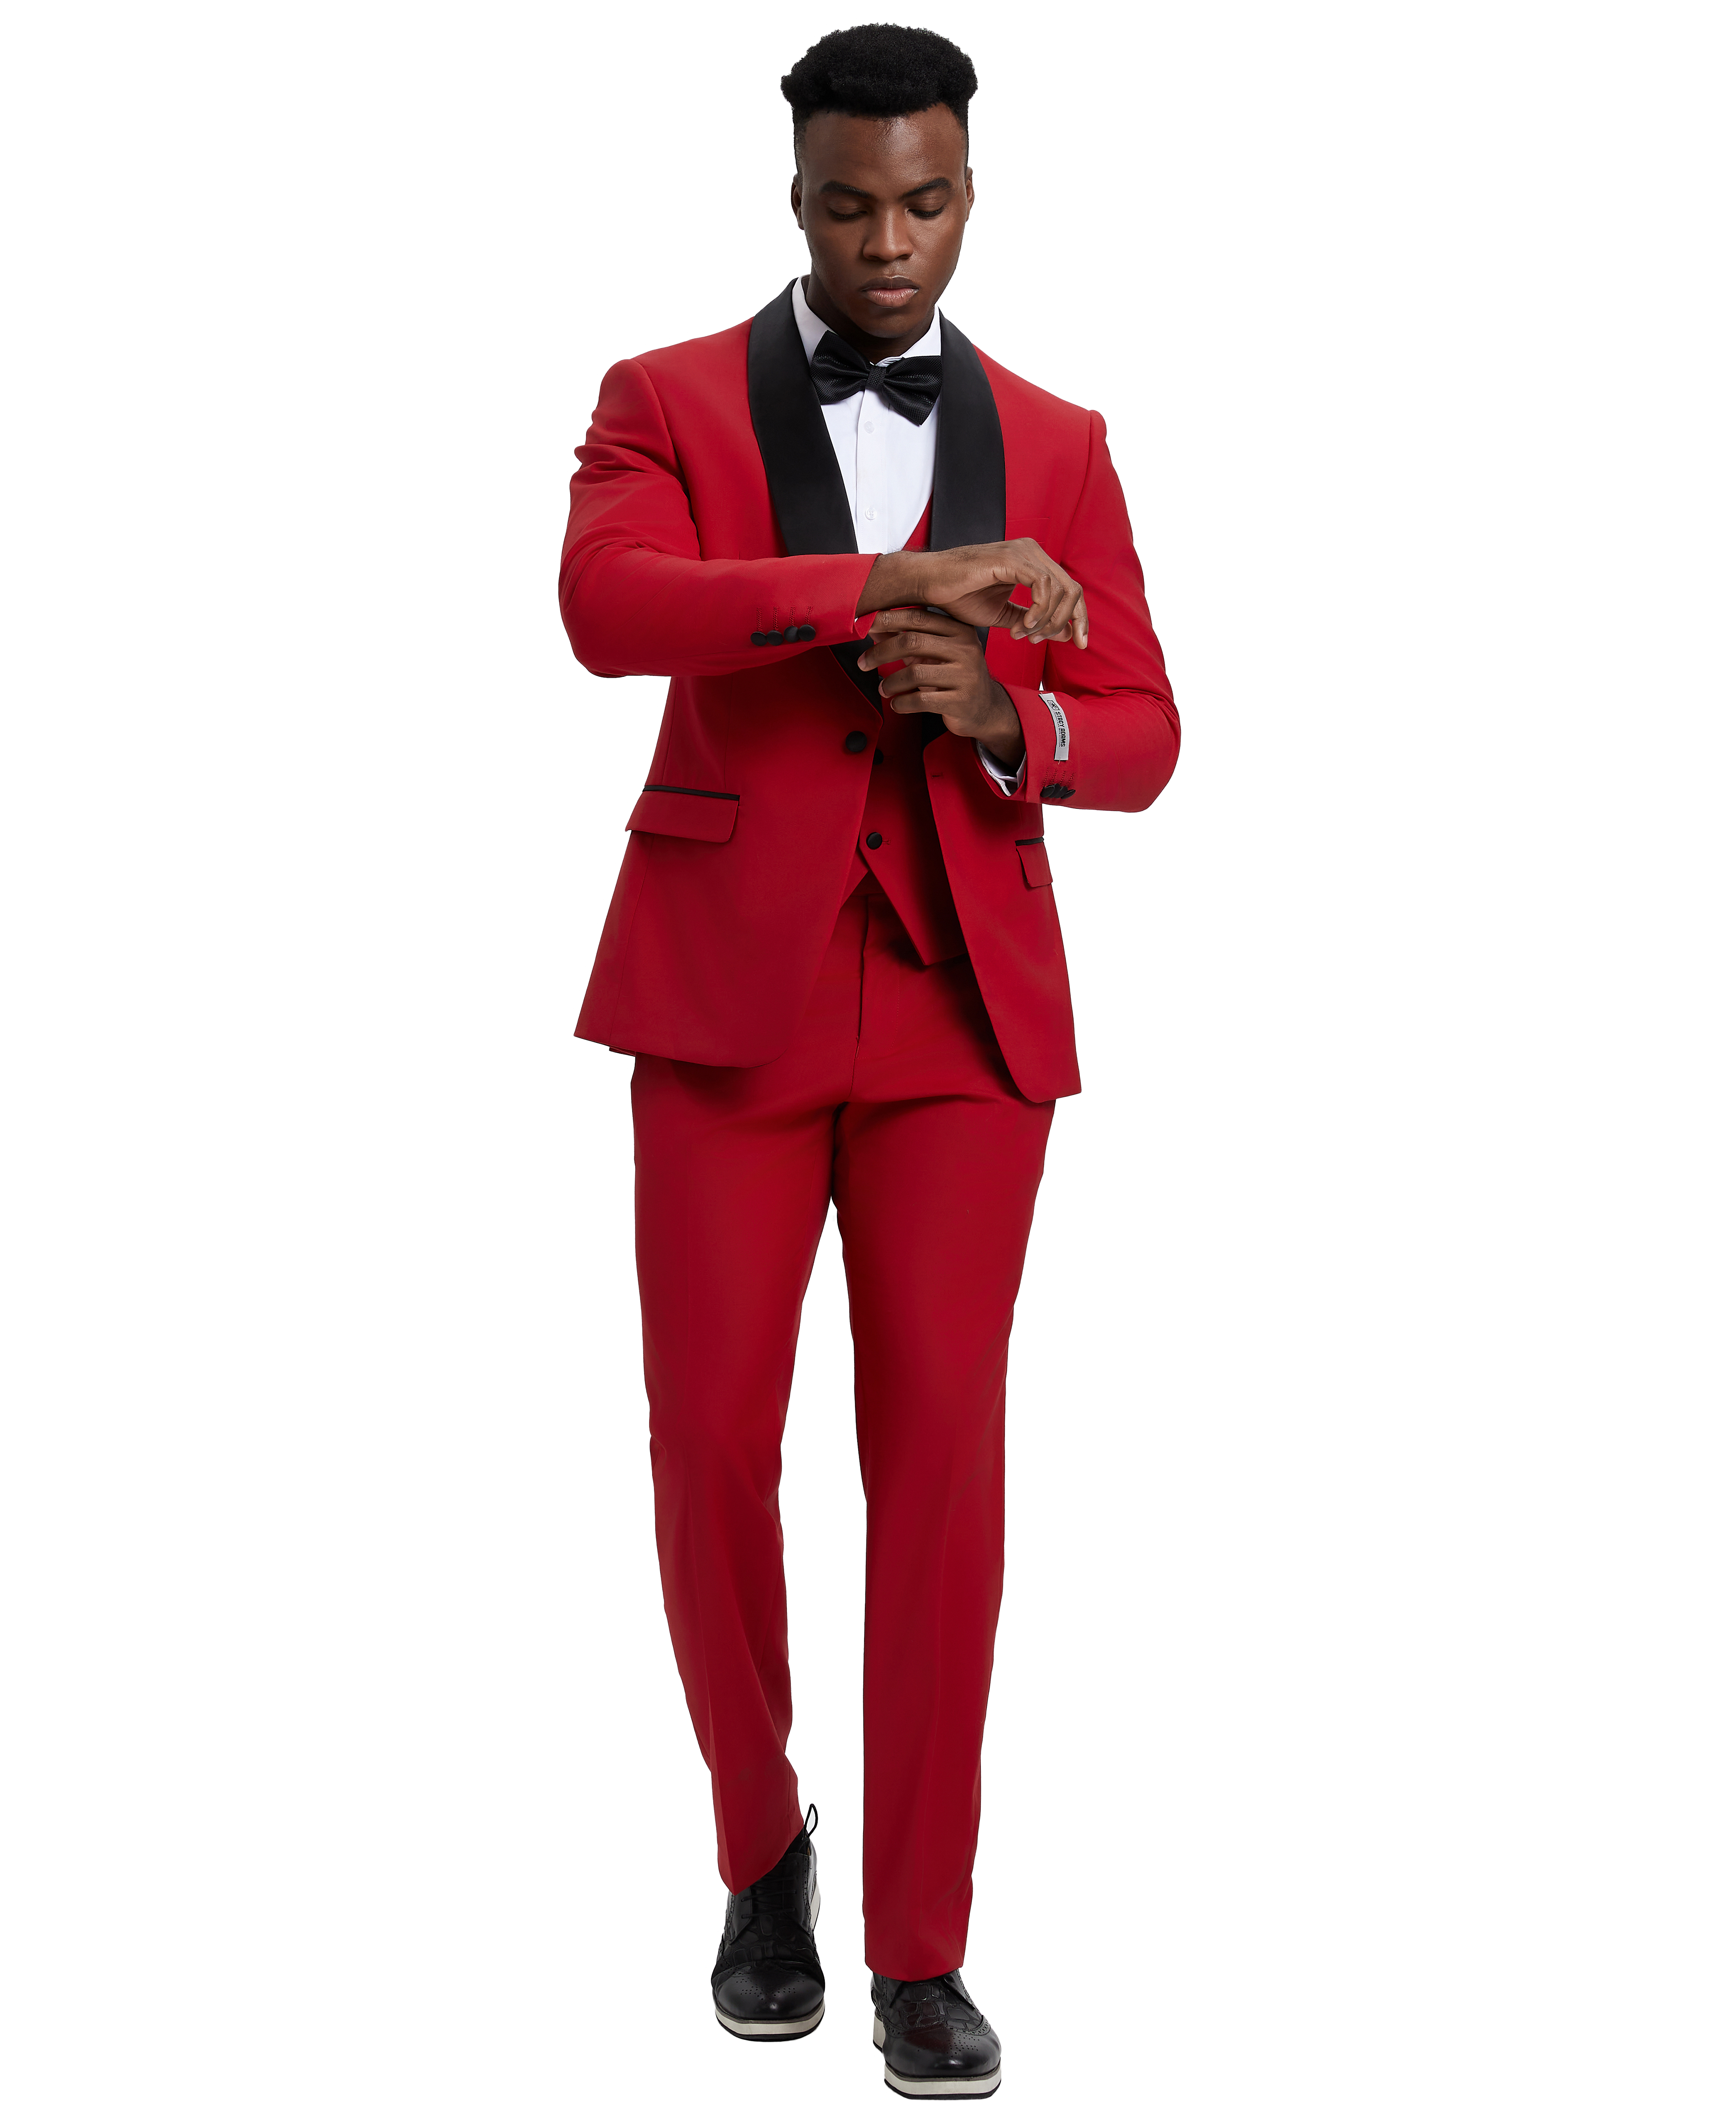 Stacy Adams Hybrid-Fit Vested Tuxedo, Red